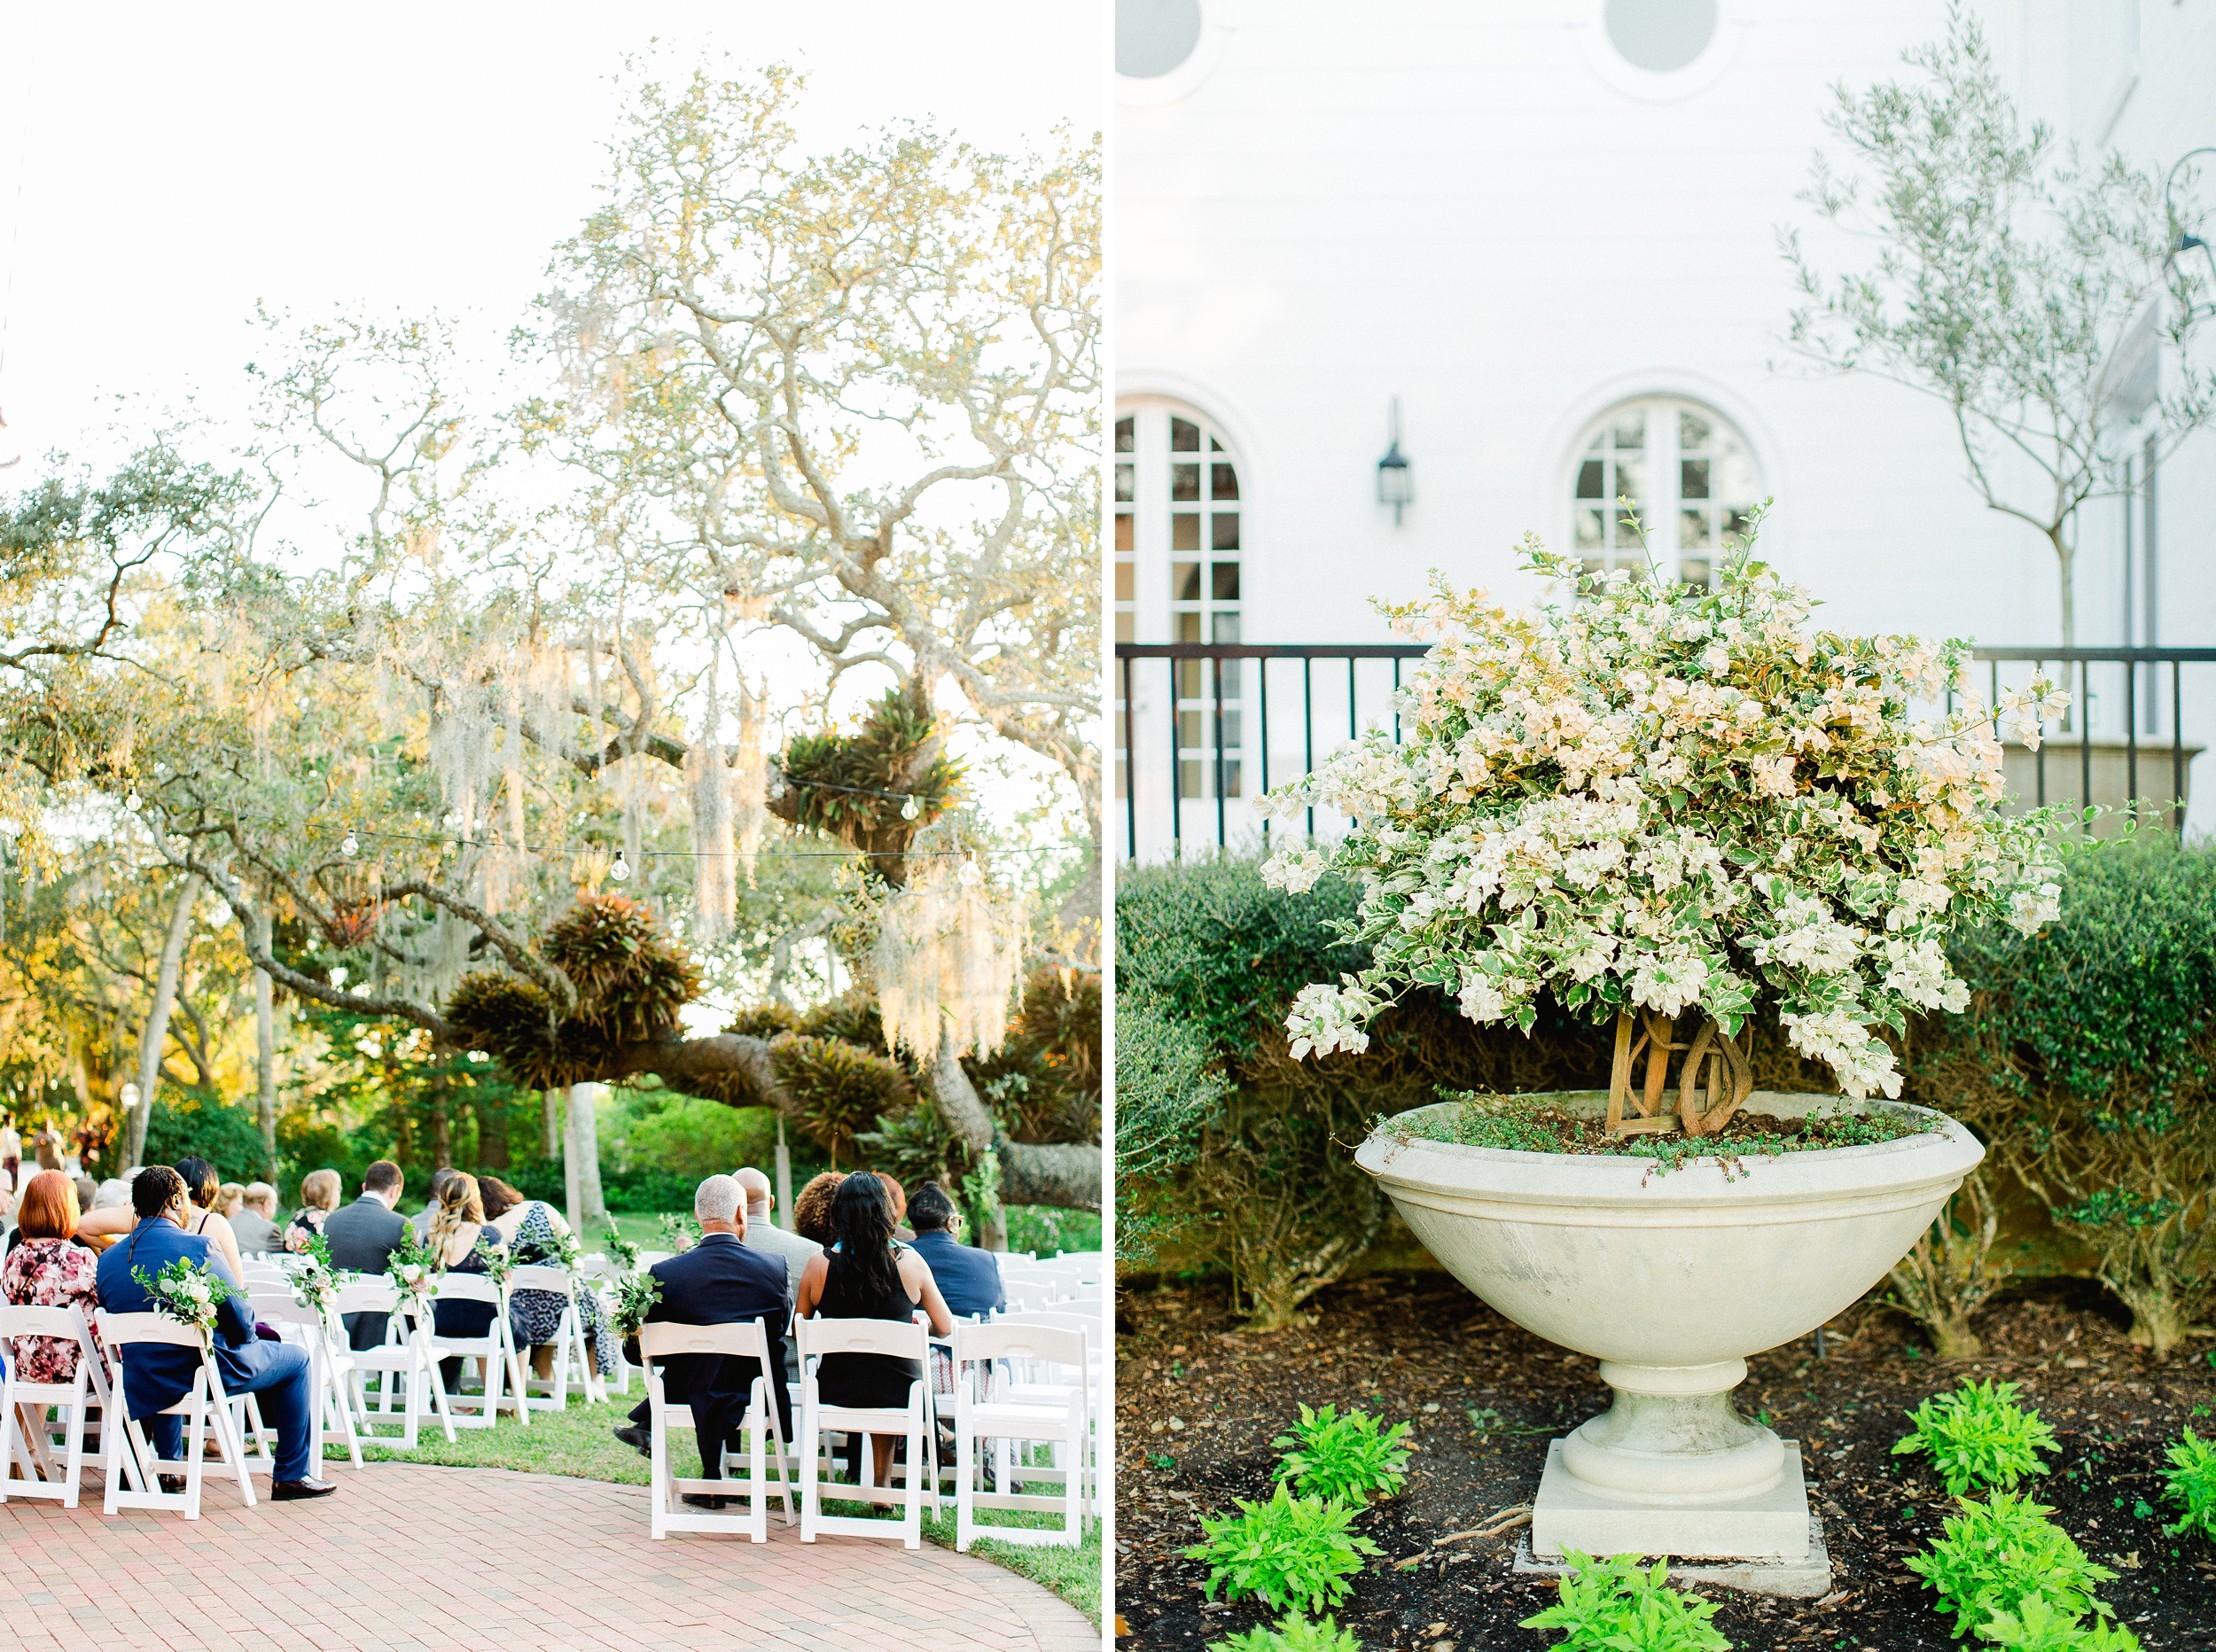 Selby Gardens Wedding | © Ailyn La Torre Photography 2019